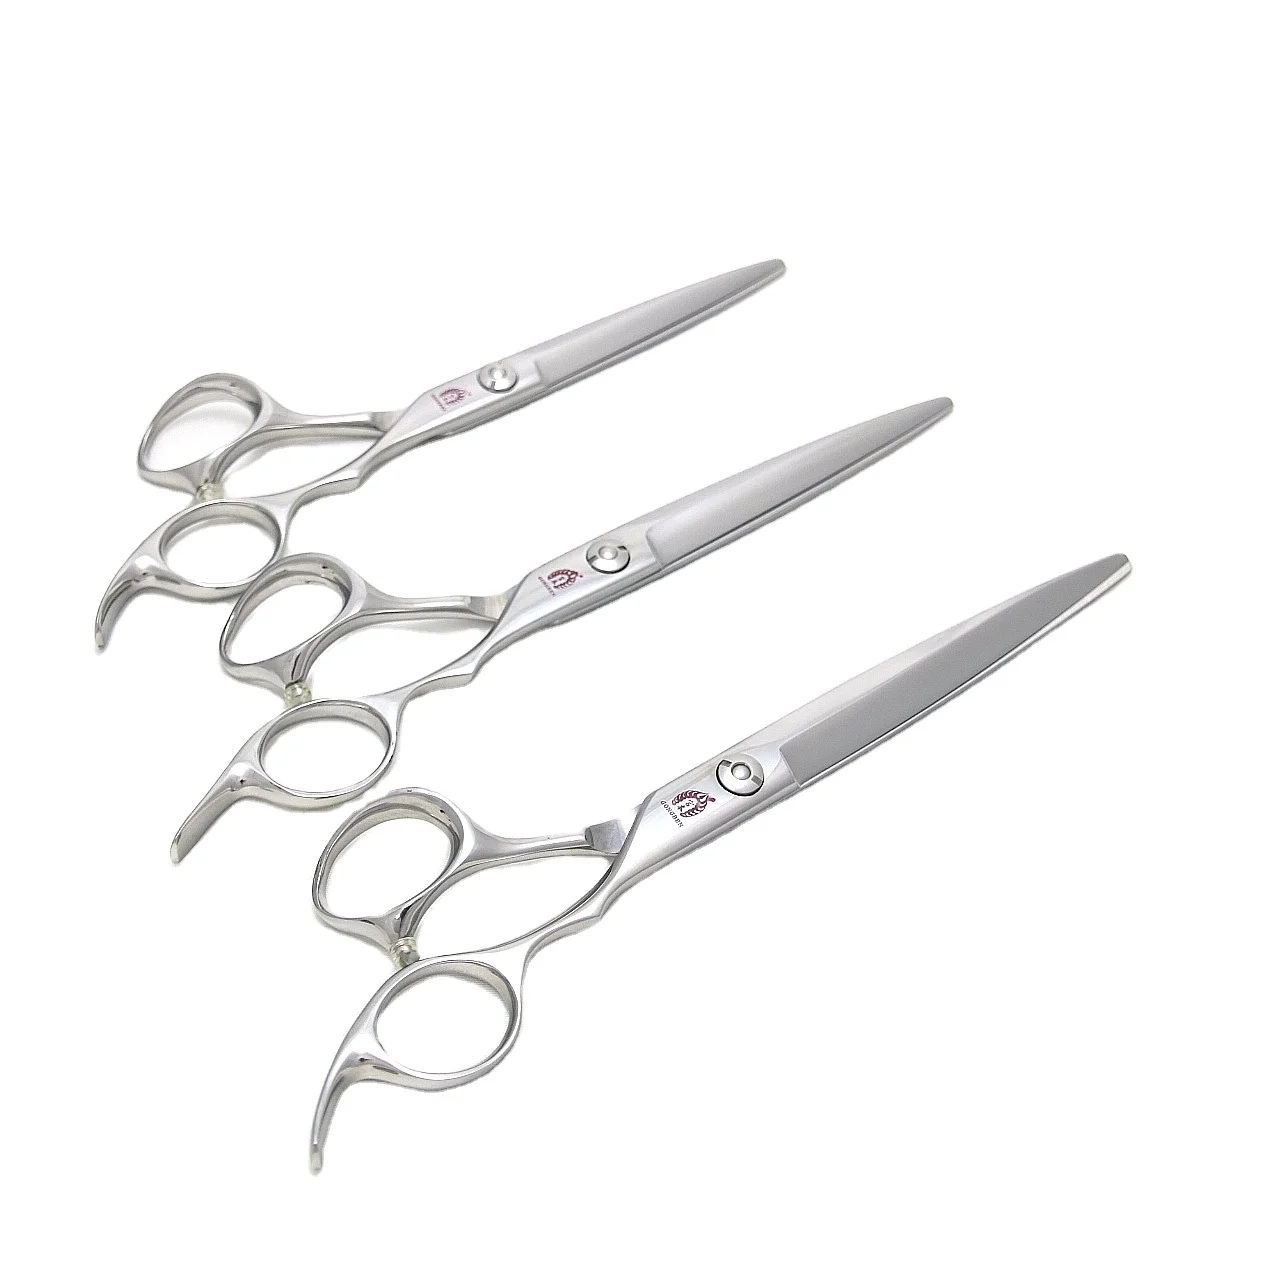 

Hot sale products Japanese design 440C steel 6 inch Stainless professional Beauty Sharp Finish Barber Scissors, Silver